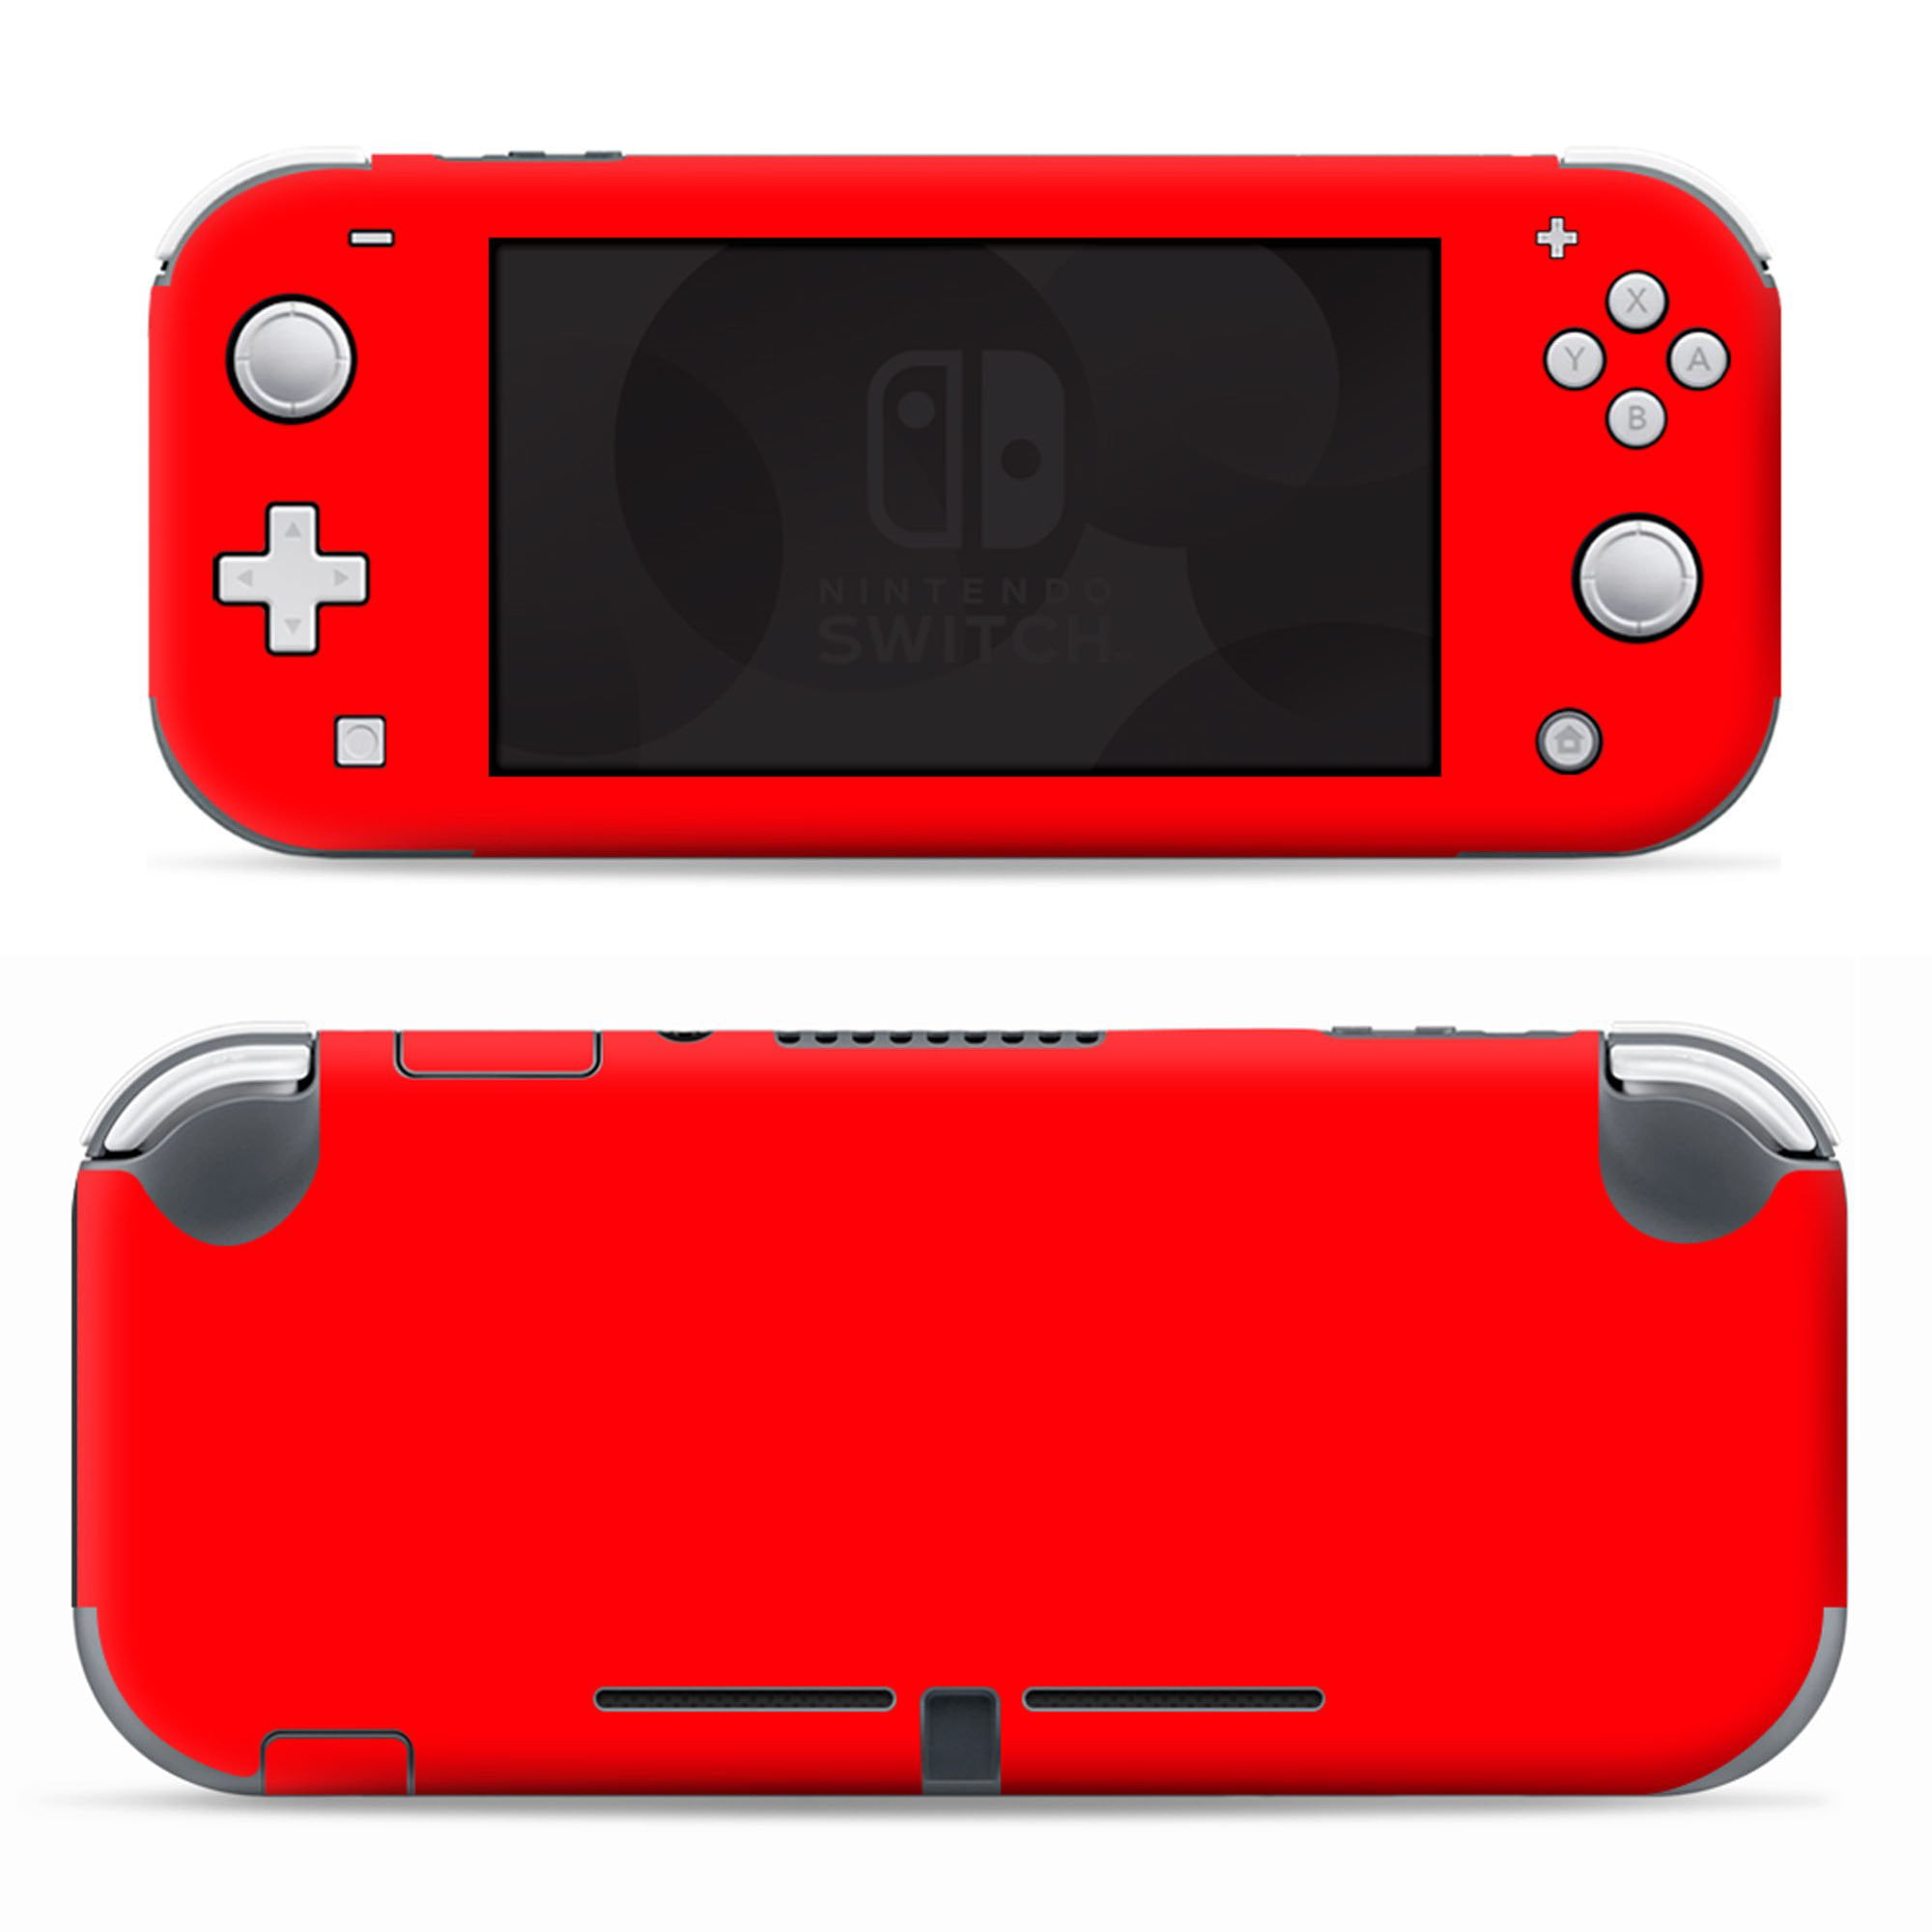 Nintendo Switch Lite Skins Decals Vinyl Wrap - decal stickers skins cover Red color - Walmart.com